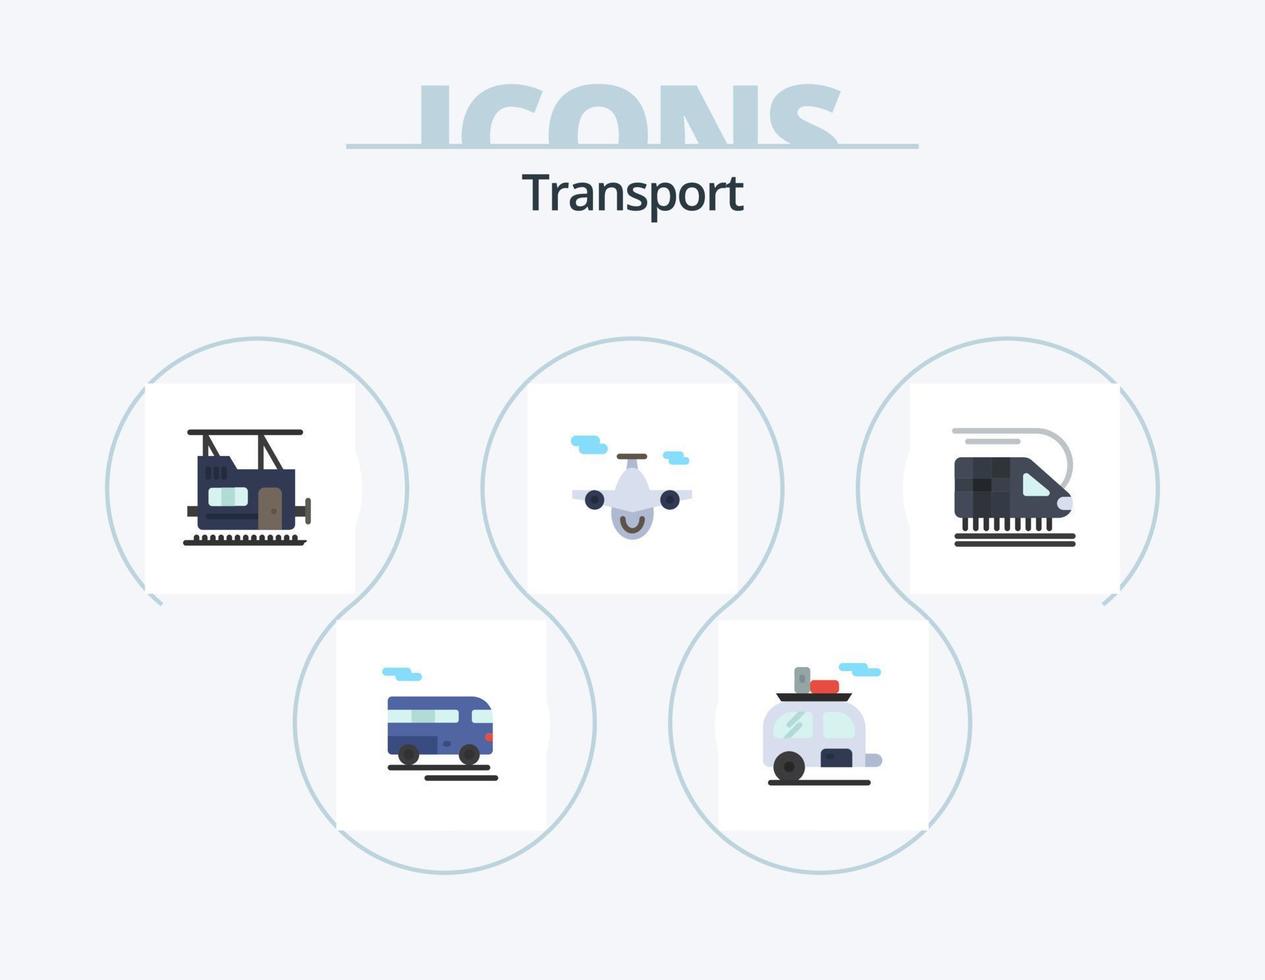 Transport flach Icon Pack 5 Icon Design. Transport. Welt. Transport. Transport. Flugzeug vektor